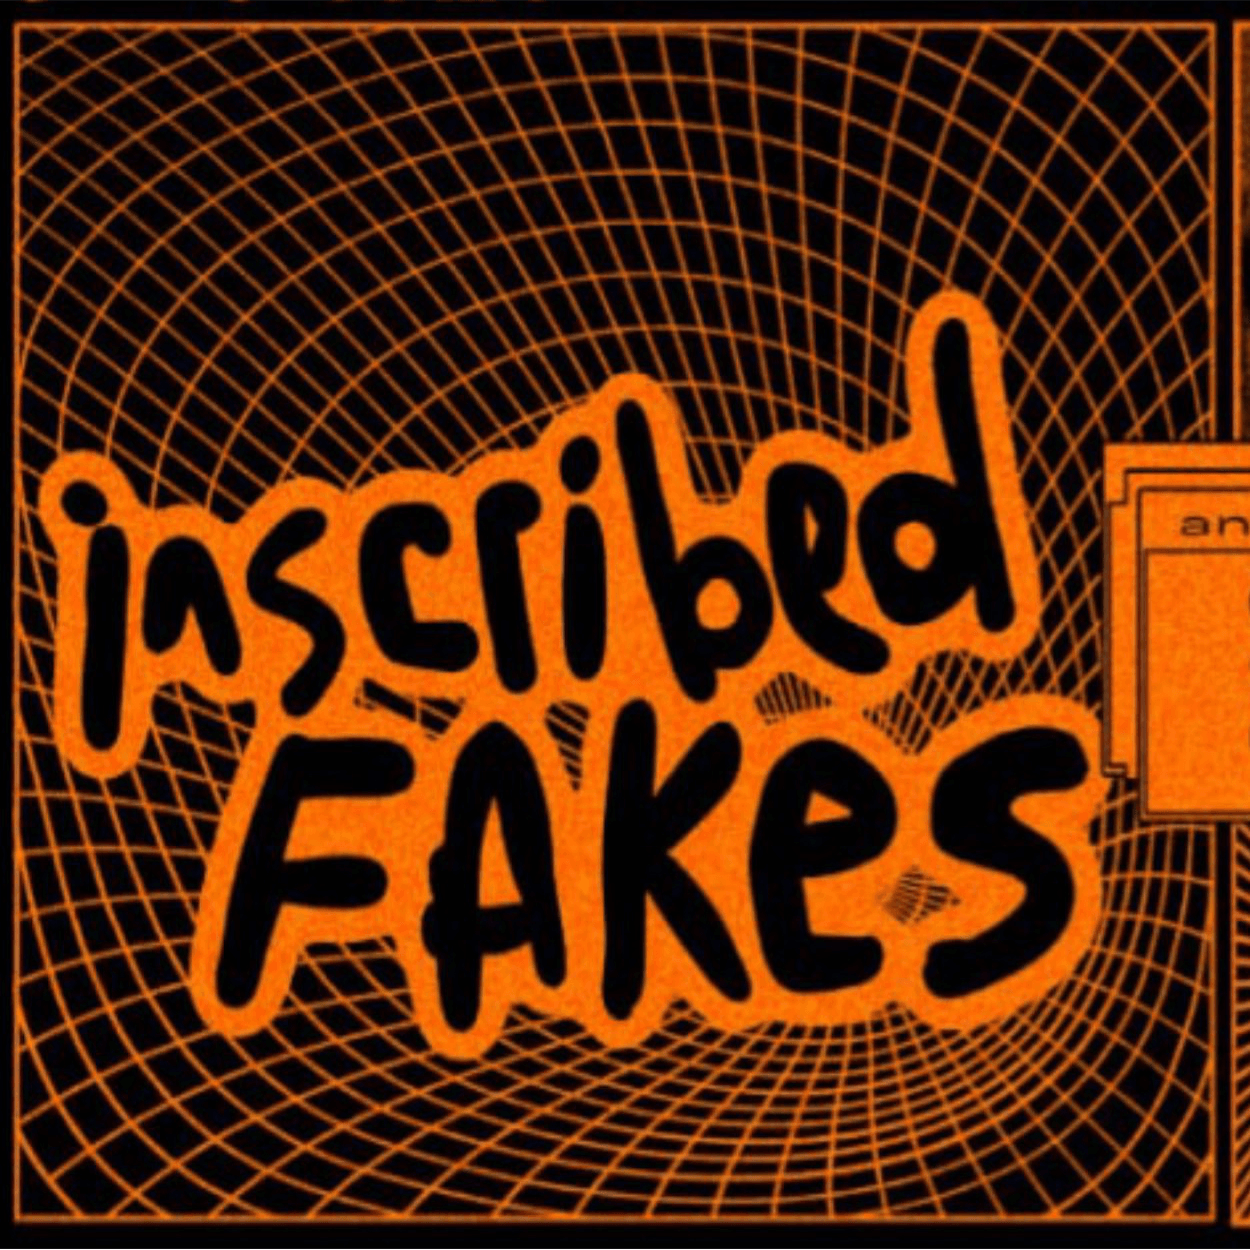 Inscribed Fakes